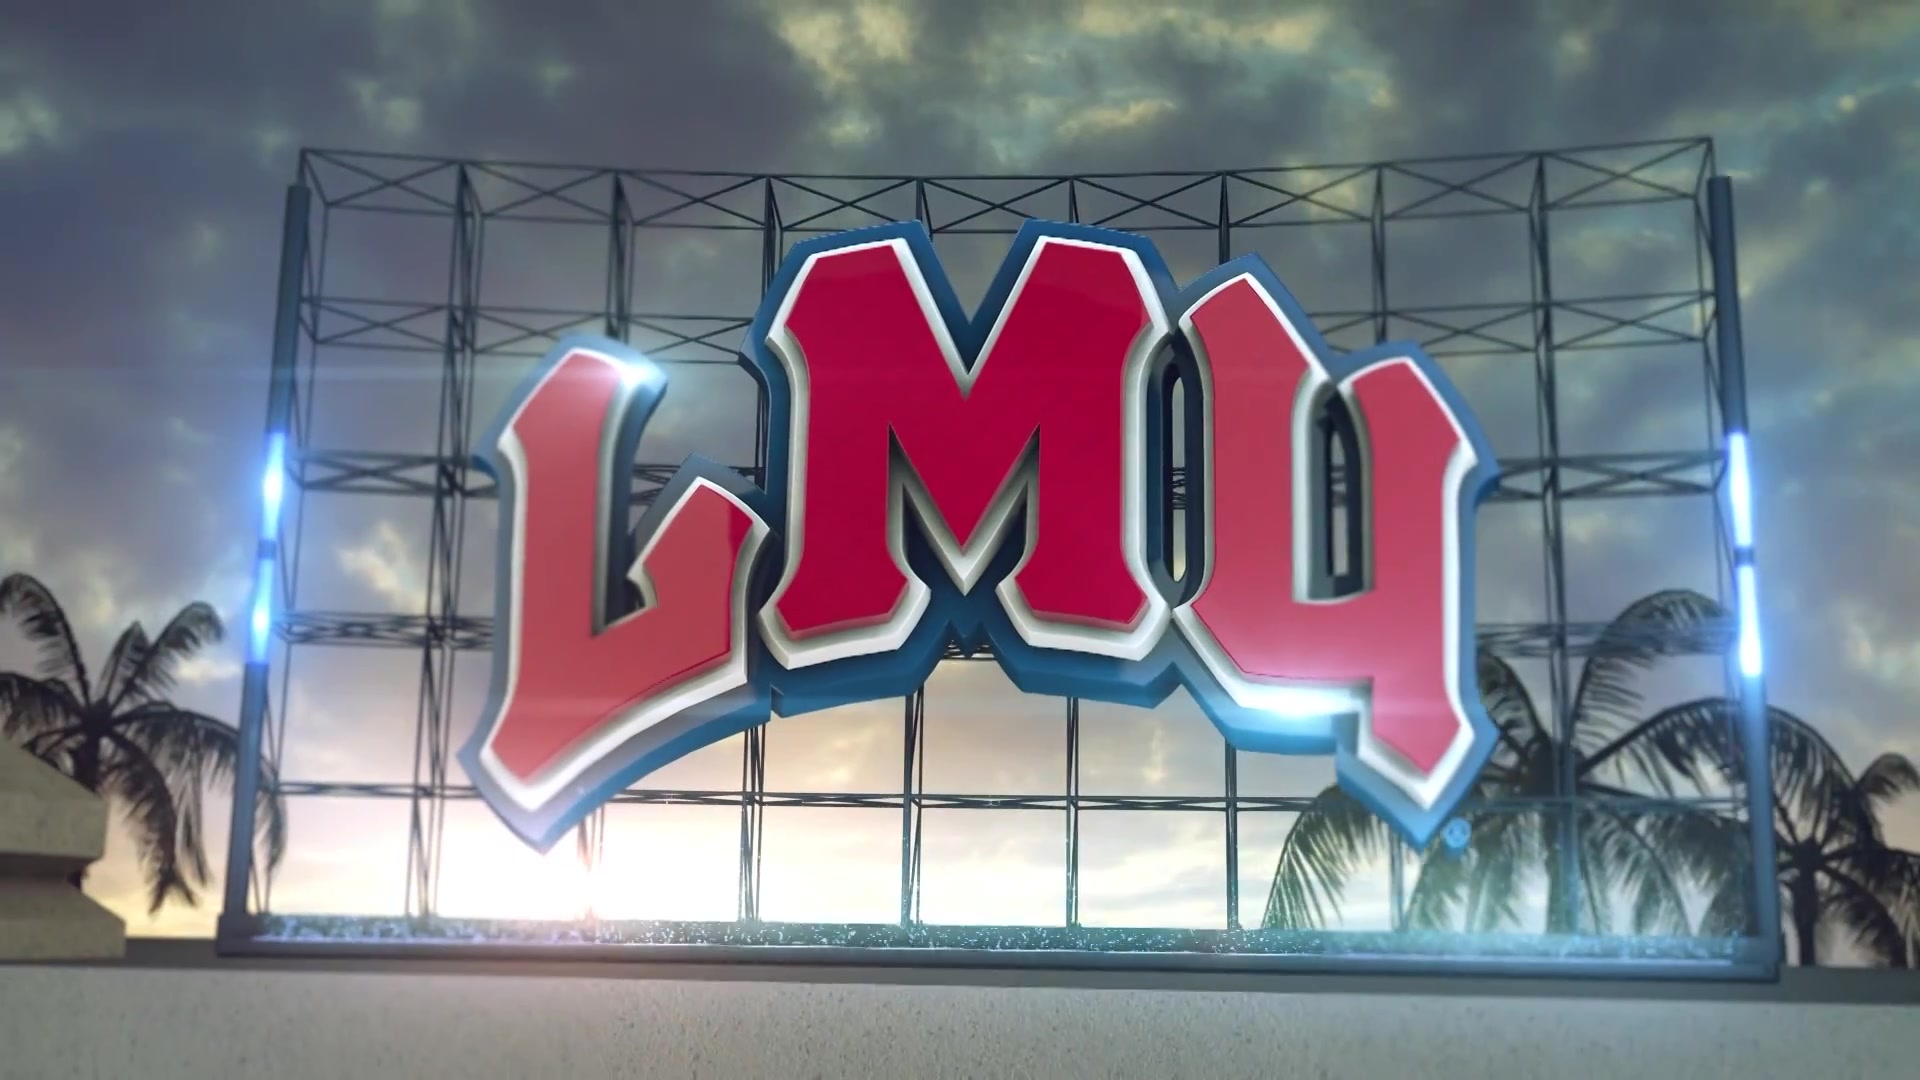 Get Ready for the 2015-16 LMU Men's Hoops Season!